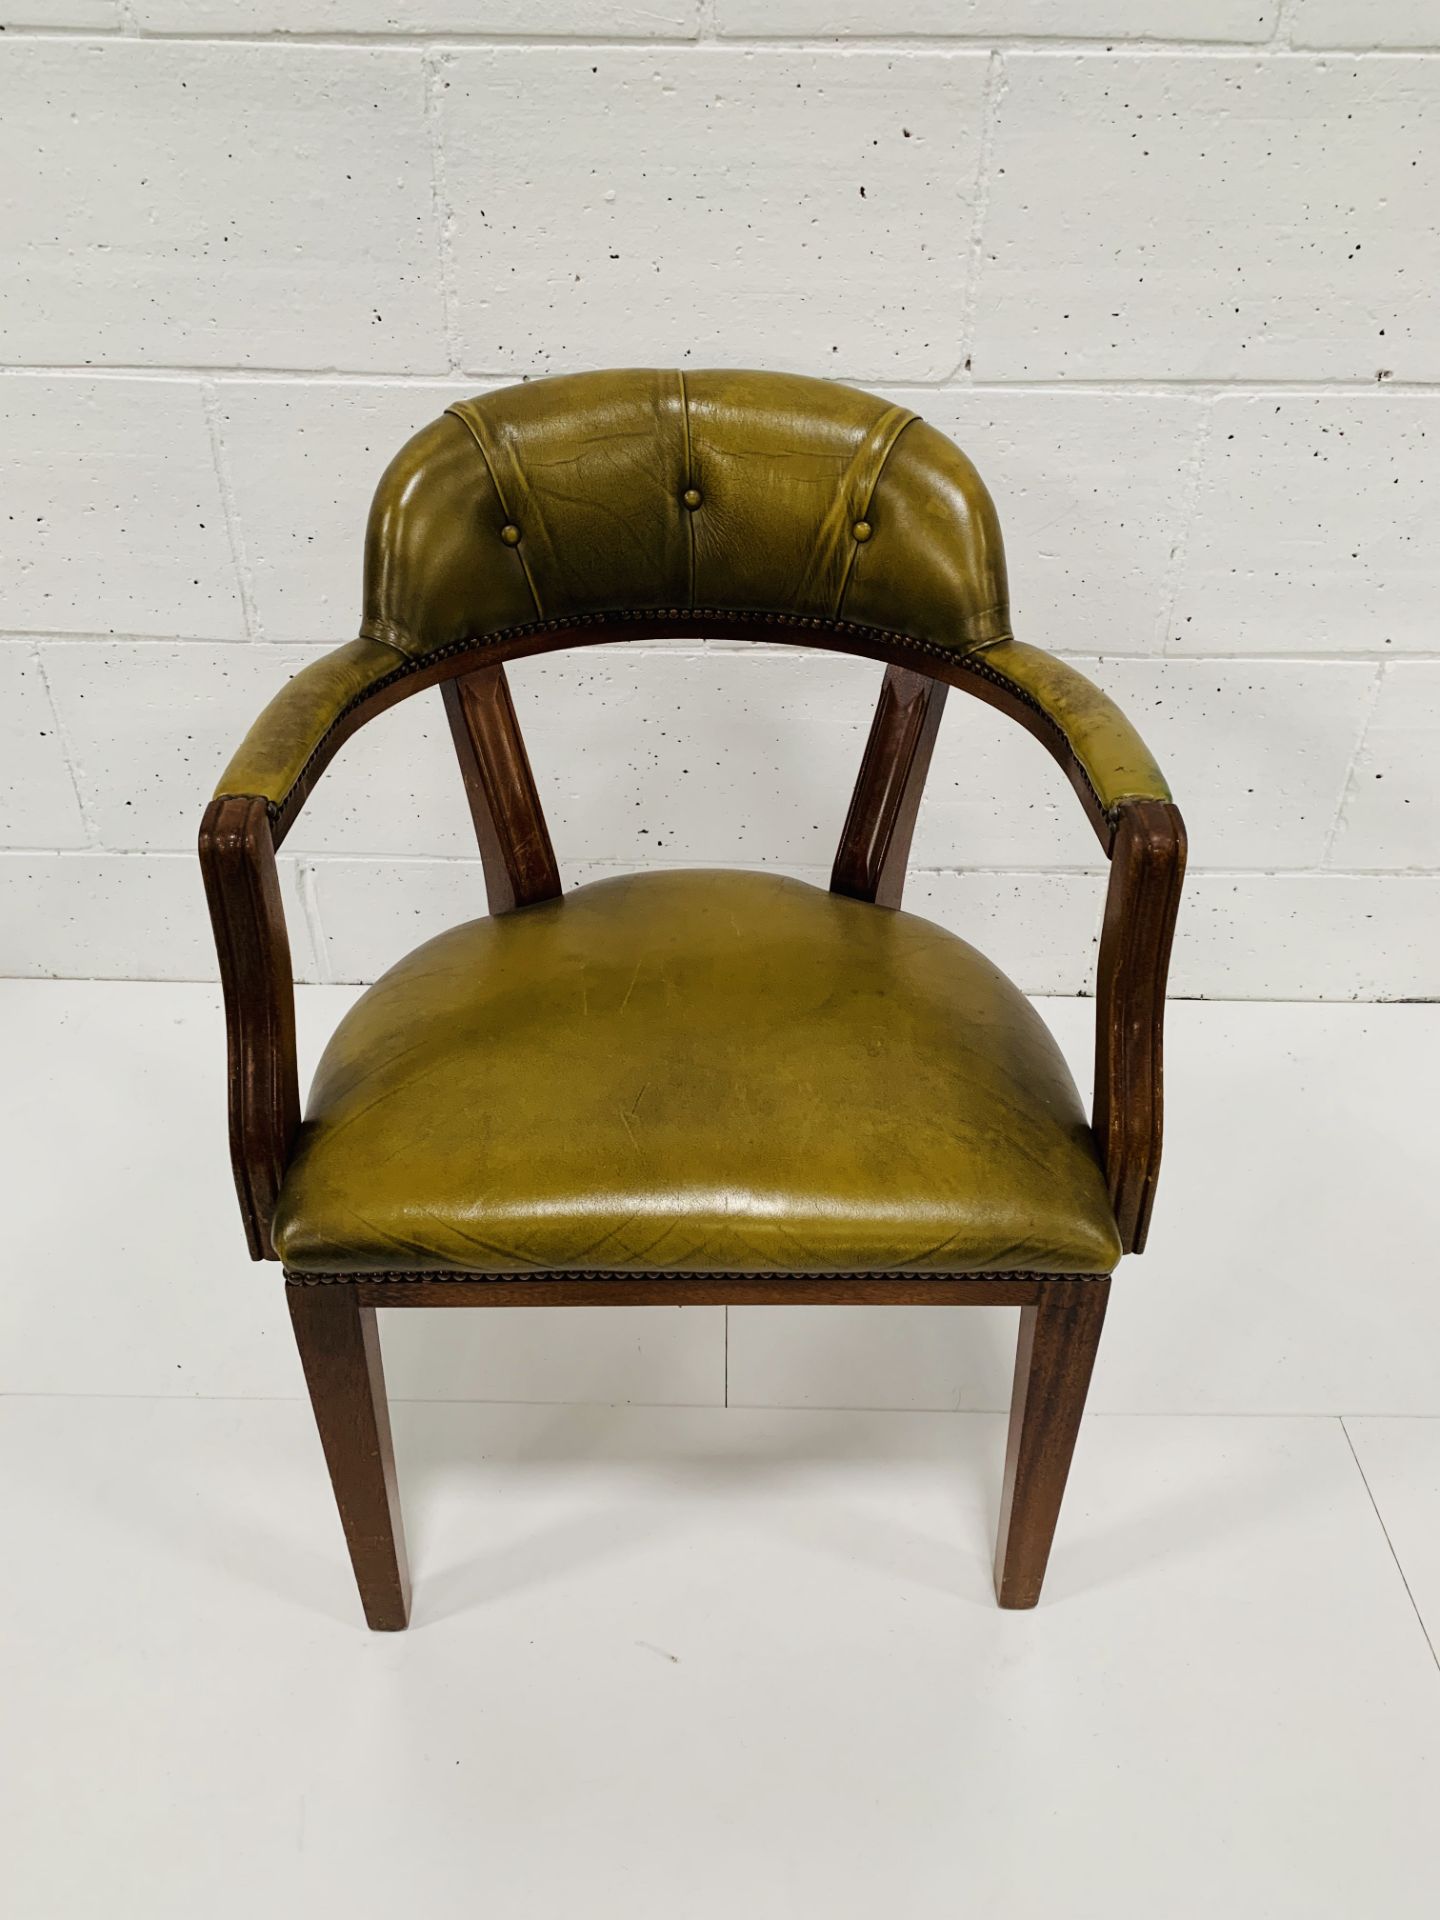 Green leather open armchair.